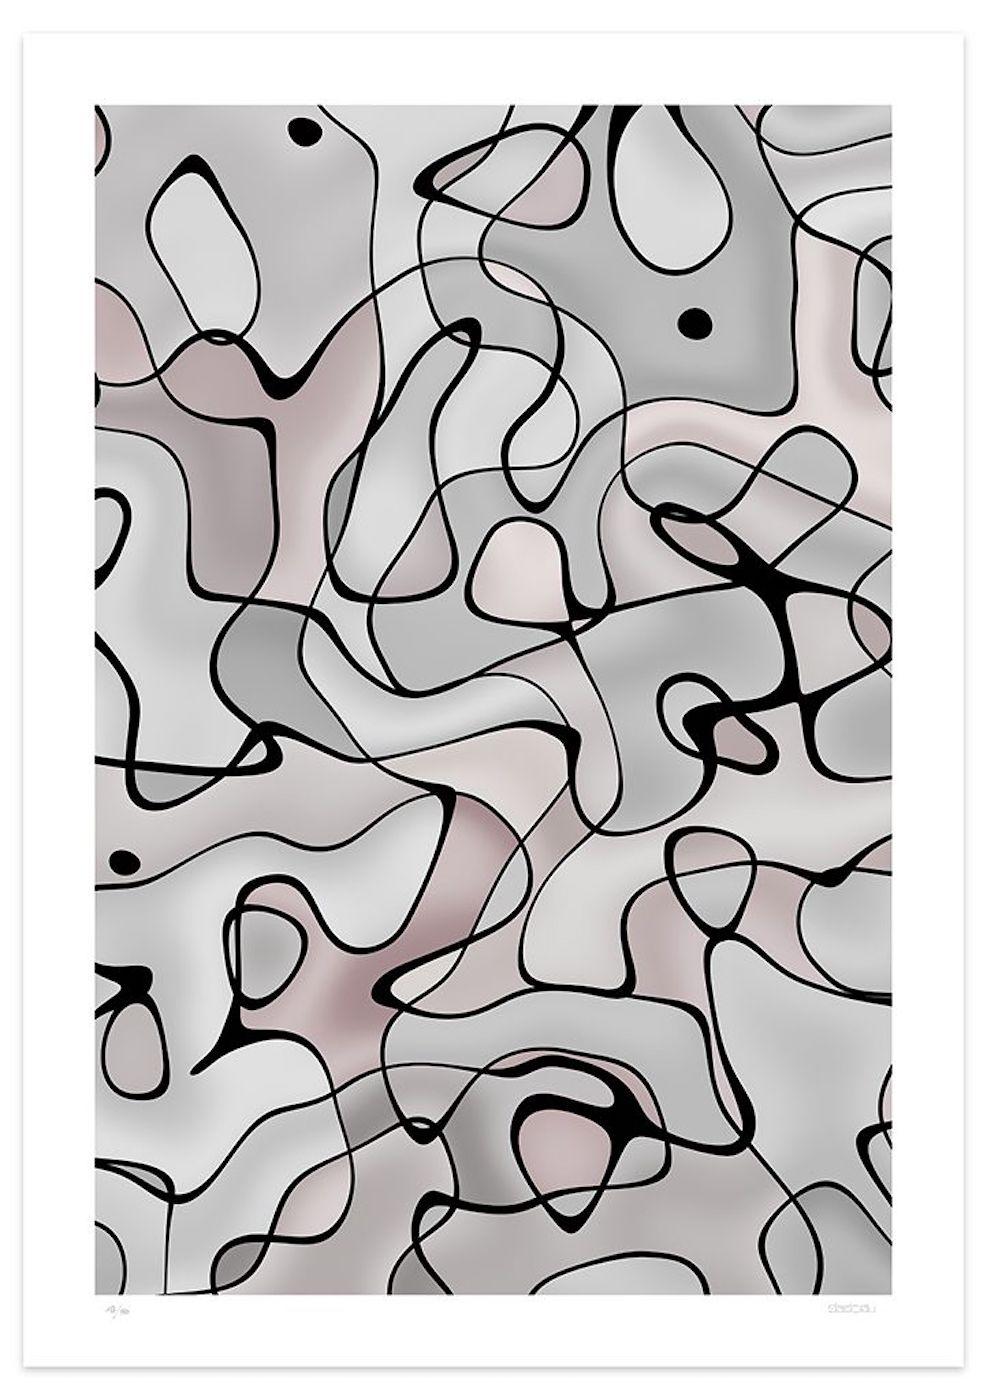 Image dimensions 70 x 46.9 cm

Dimension 4 is a colorful giclée print realized by the contemporary artist Dadodu in 2012.

This original artwork represents an abstract composition with warm and cold shades of gray and black lines.

Hand-signed on